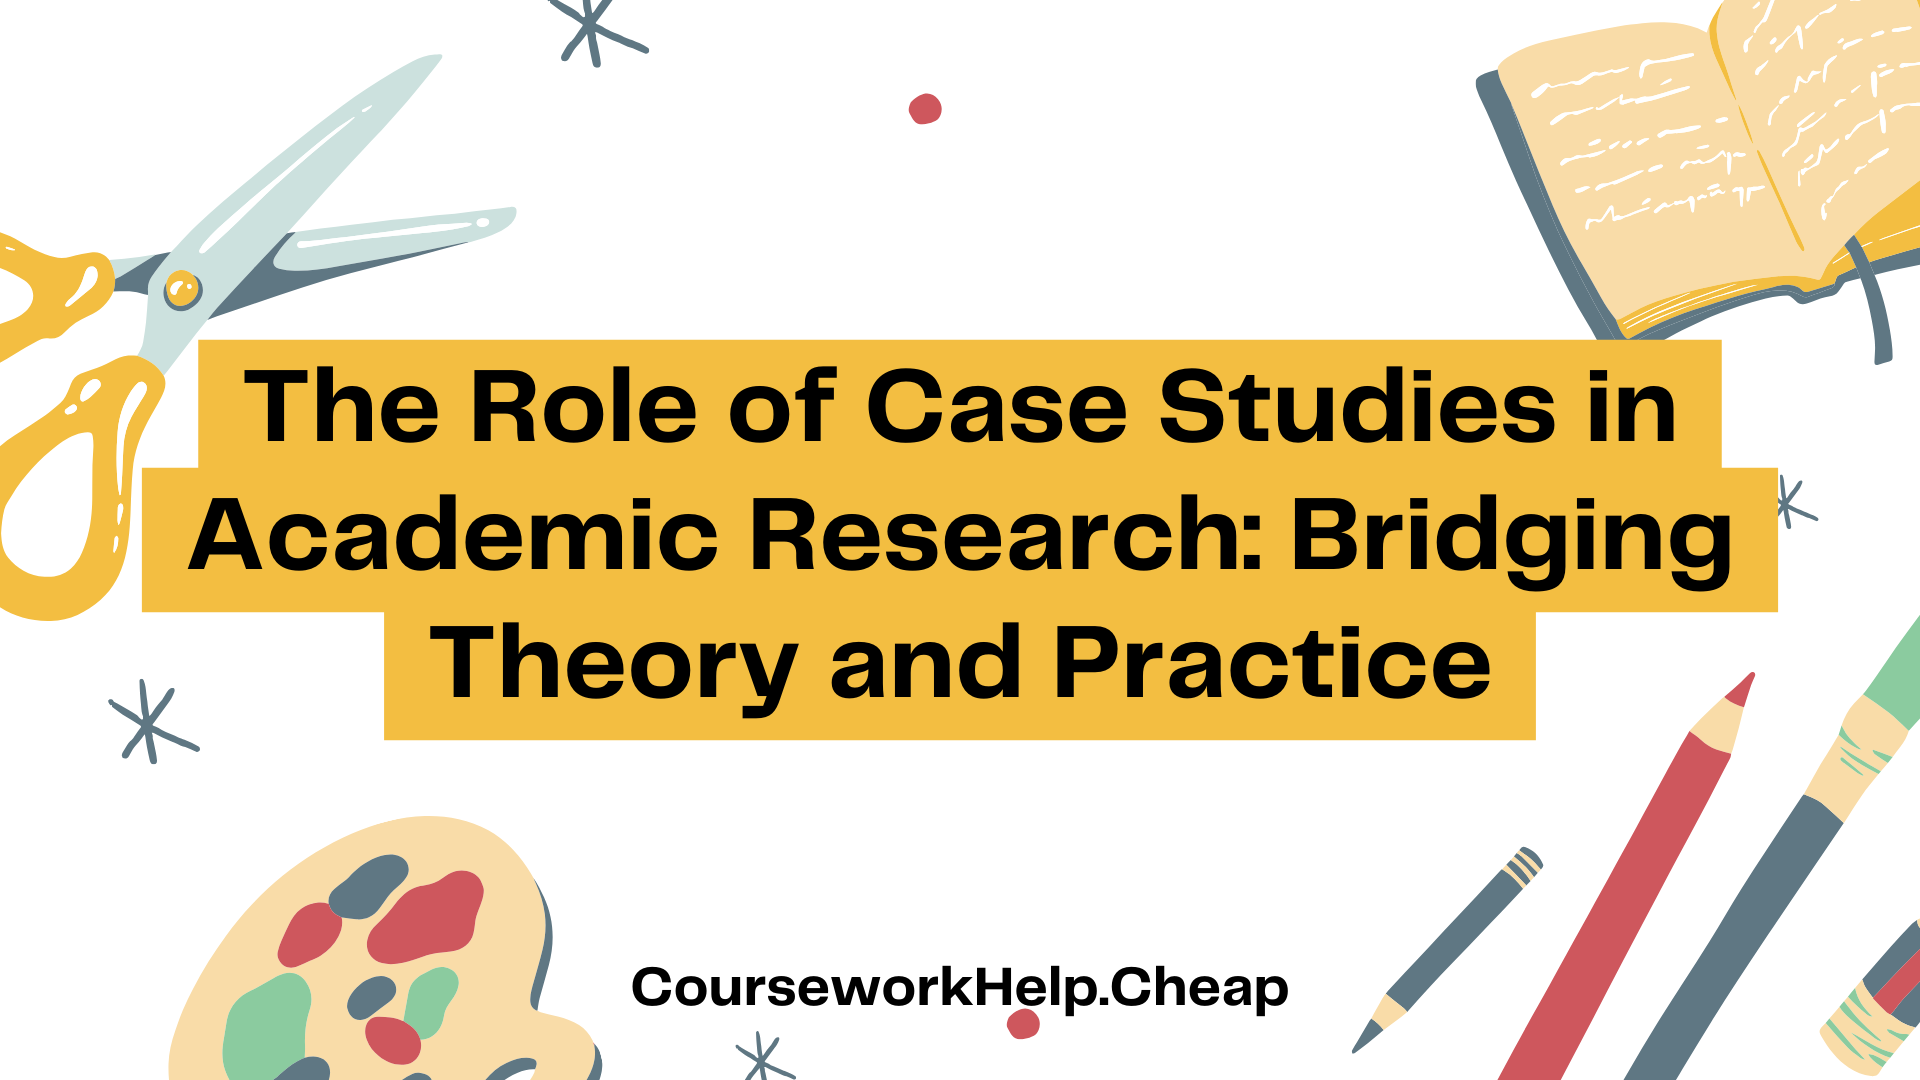 The Role of Case Studies in Academic Research: Bridging Theory and Practice